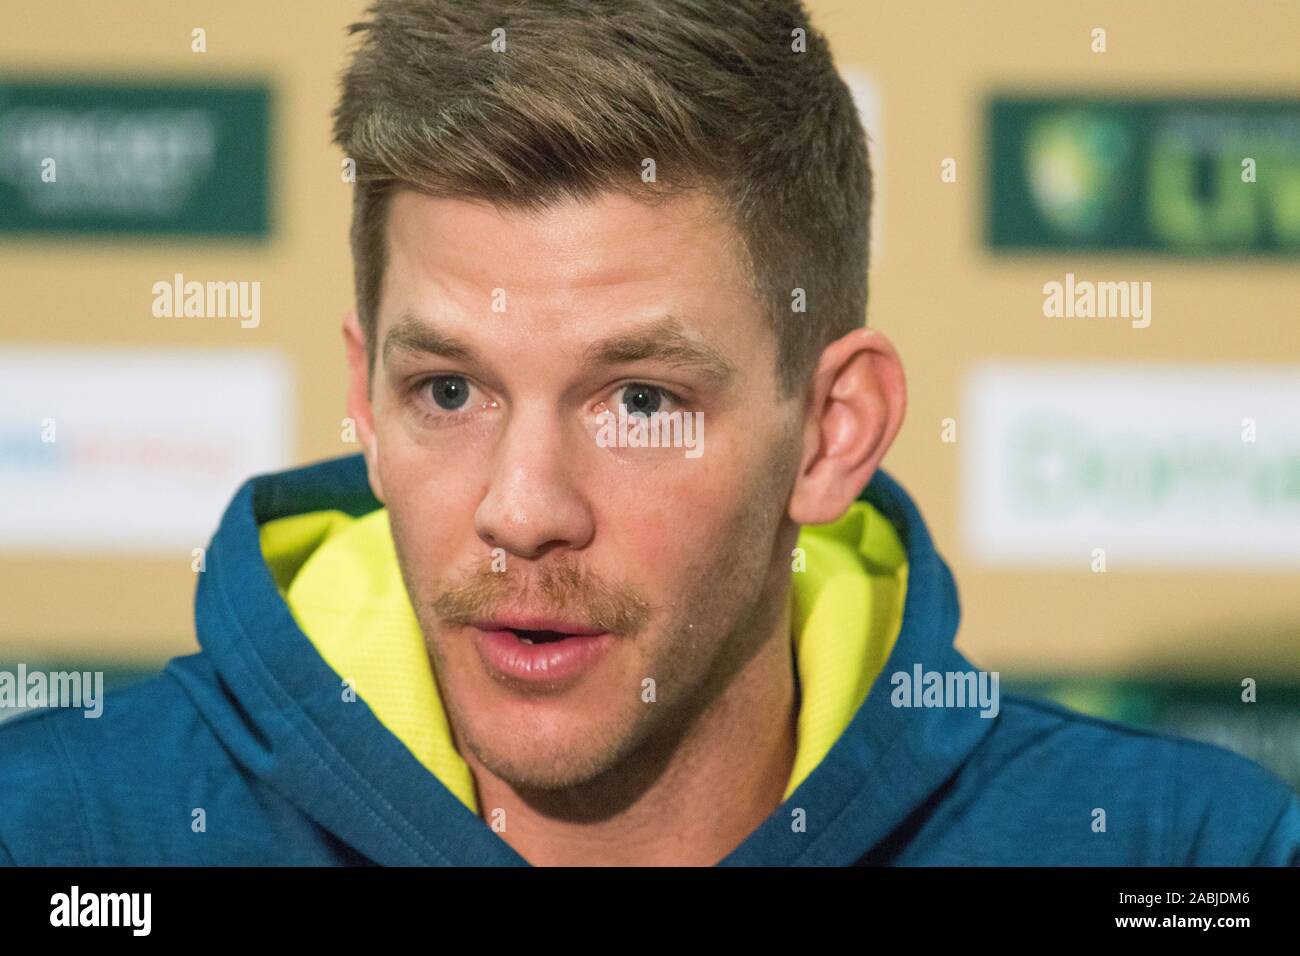 Adelaide, Australia 28 November 2019. Australia Cricket test captain Tim Paine gives a media interview ahead of the 2nd Domain Day Night test using a pink ball which begins on Friday between Australia and Pakistan at the Adelaide Oval. Australia leads 1-0 in the 2 match series .Credit: amer ghazzal/Alamy Live News Stock Photo